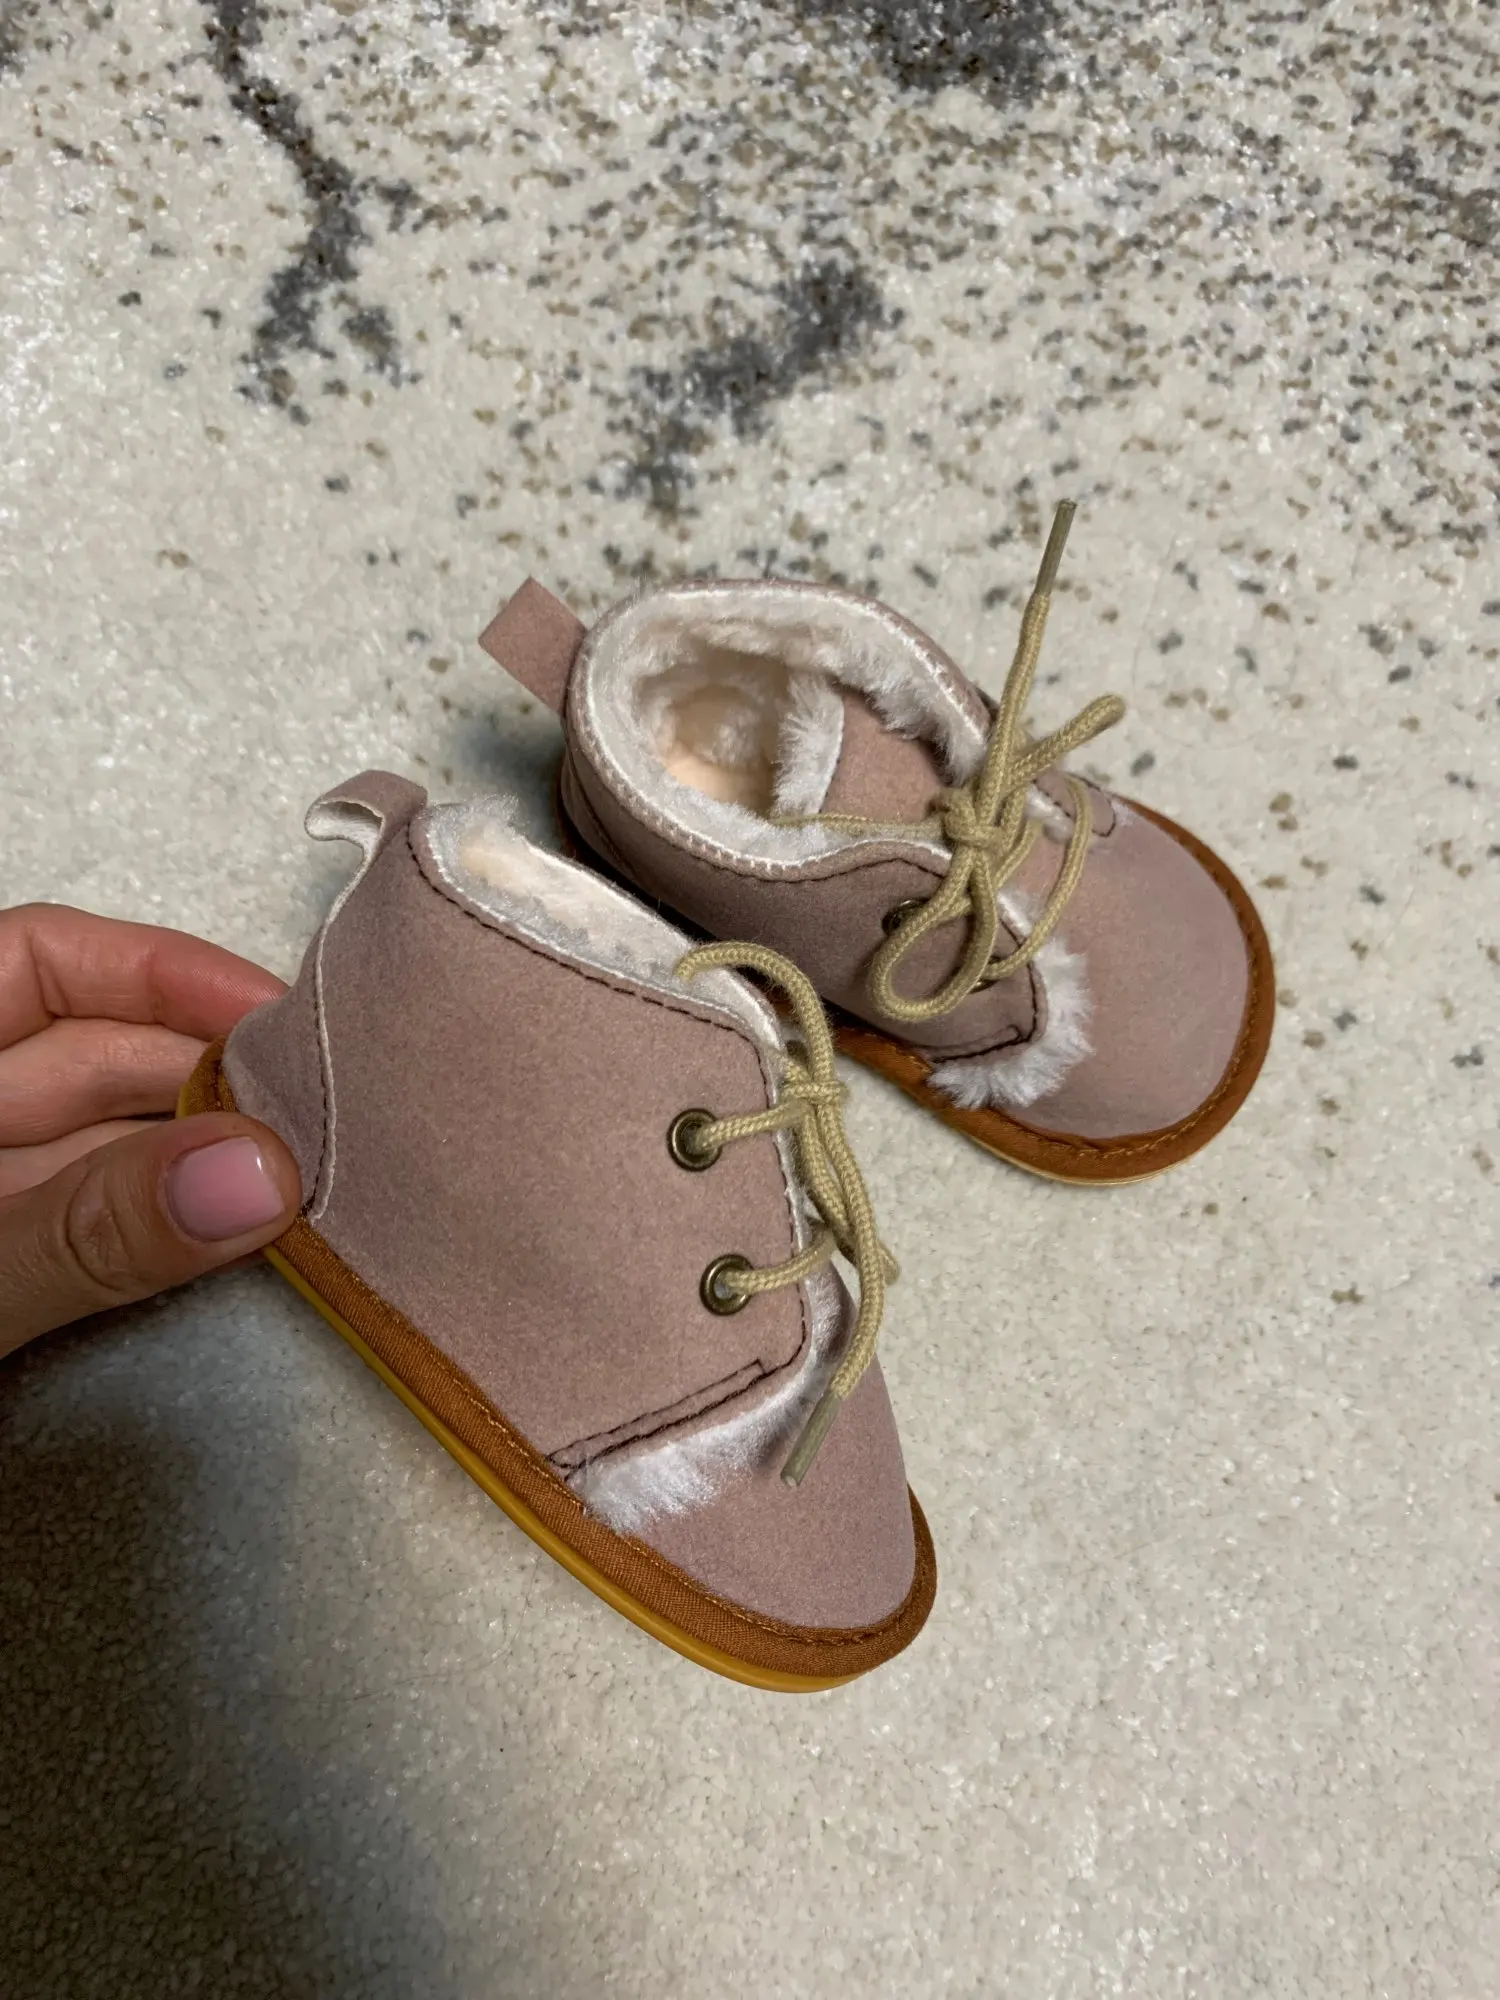 New Snow Baby Booties Shoes Baby Boy Girl Shoes Crib Shoes Winter Warm Cotton Anti-slip Sole Newborn Toddler First Walkers Shoes photo review